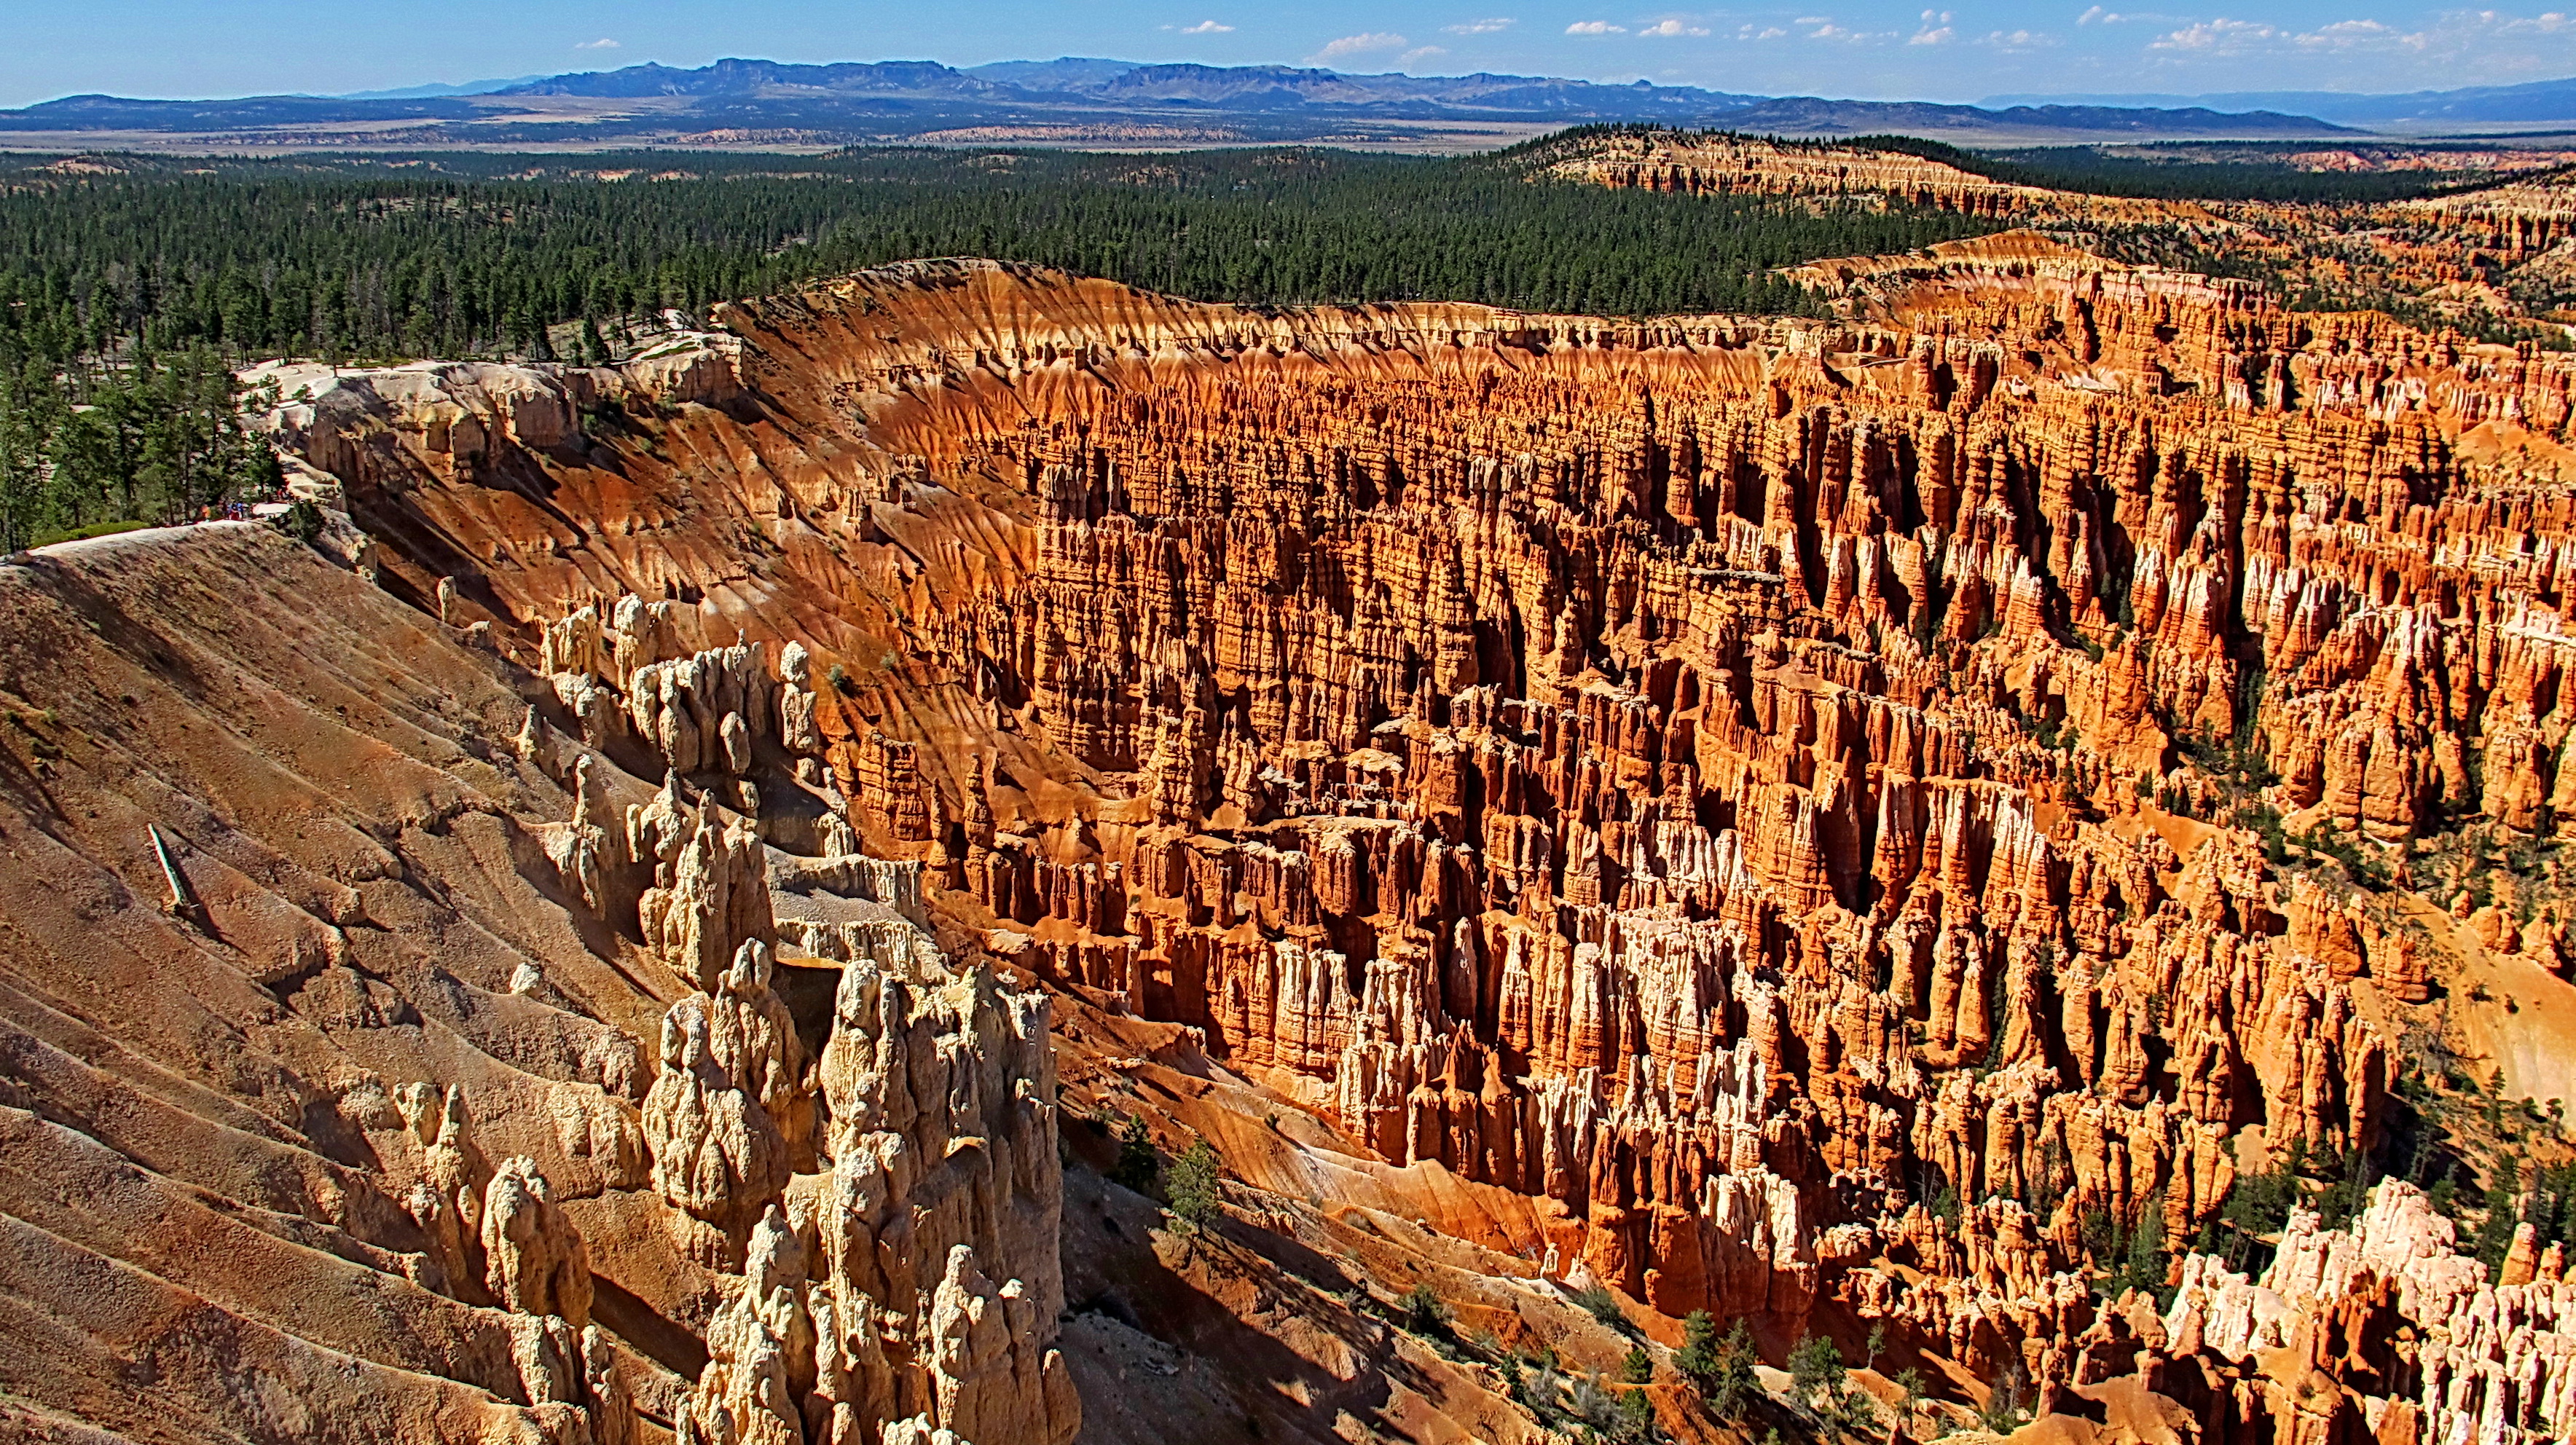 The Stunning Bryce Canyon National Park in Utah - Beautiful Tourism